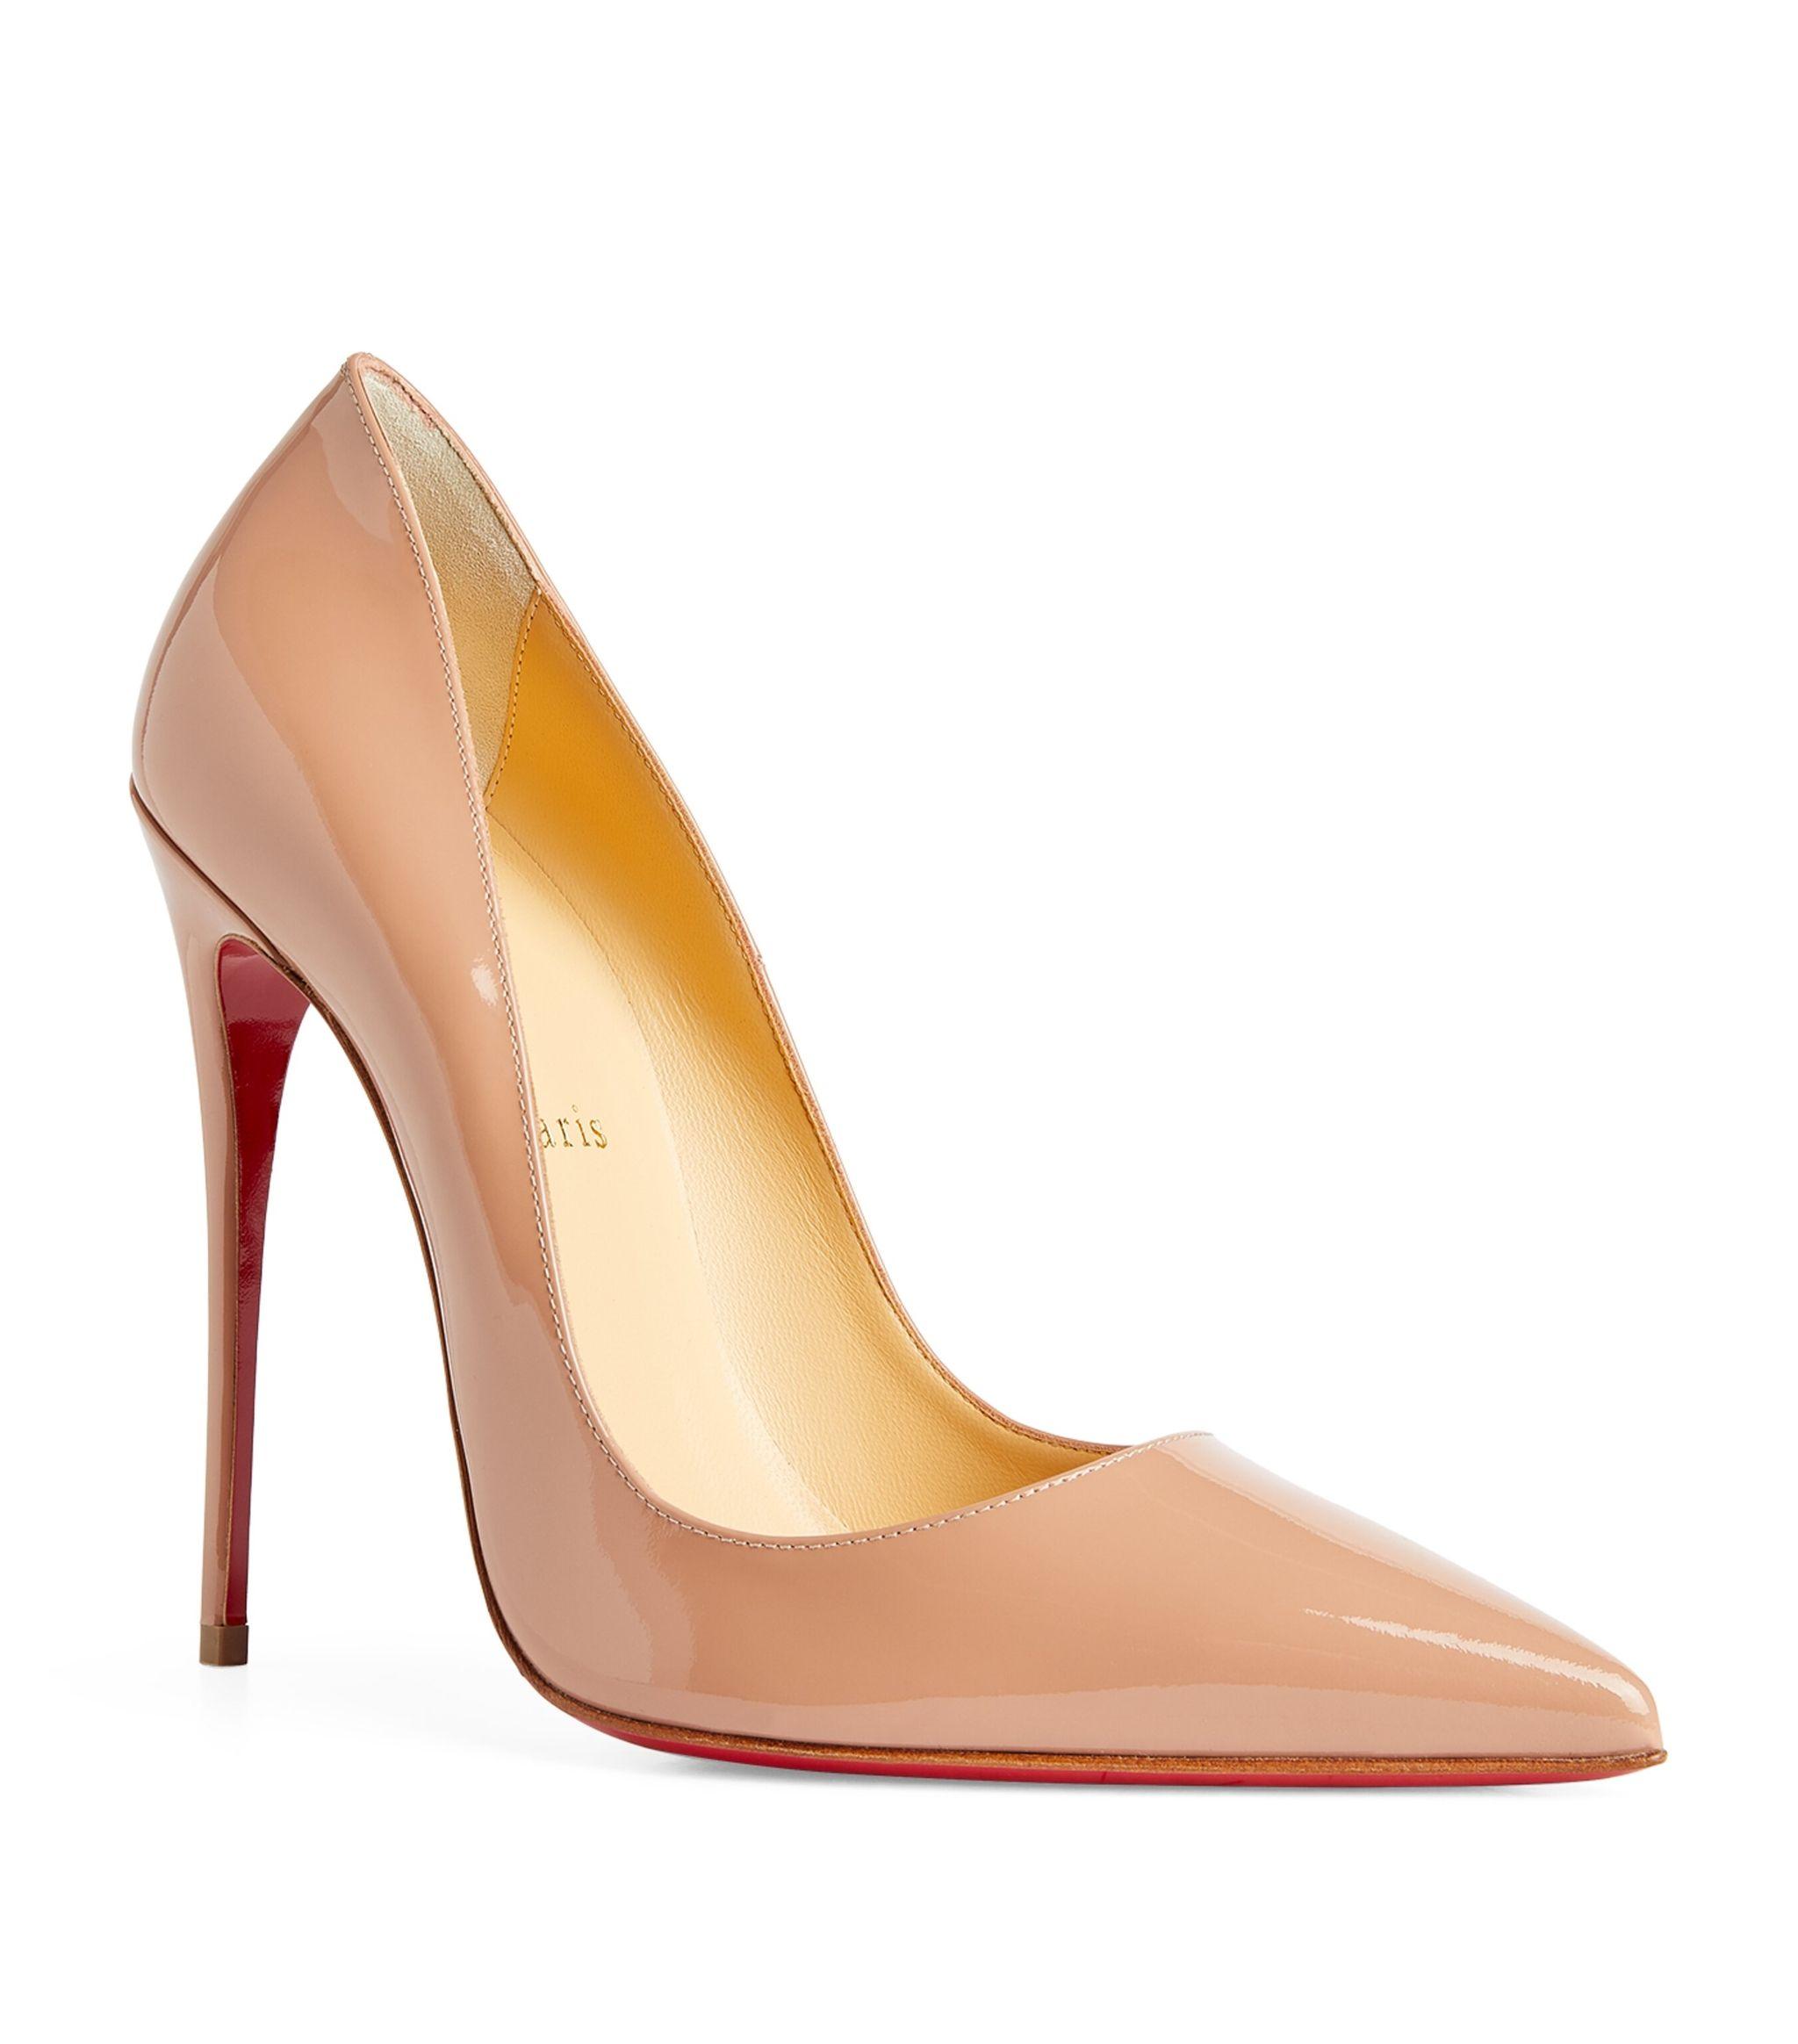 Christian Louboutin So Kate Patent Leather Pumps 120 in Nude 